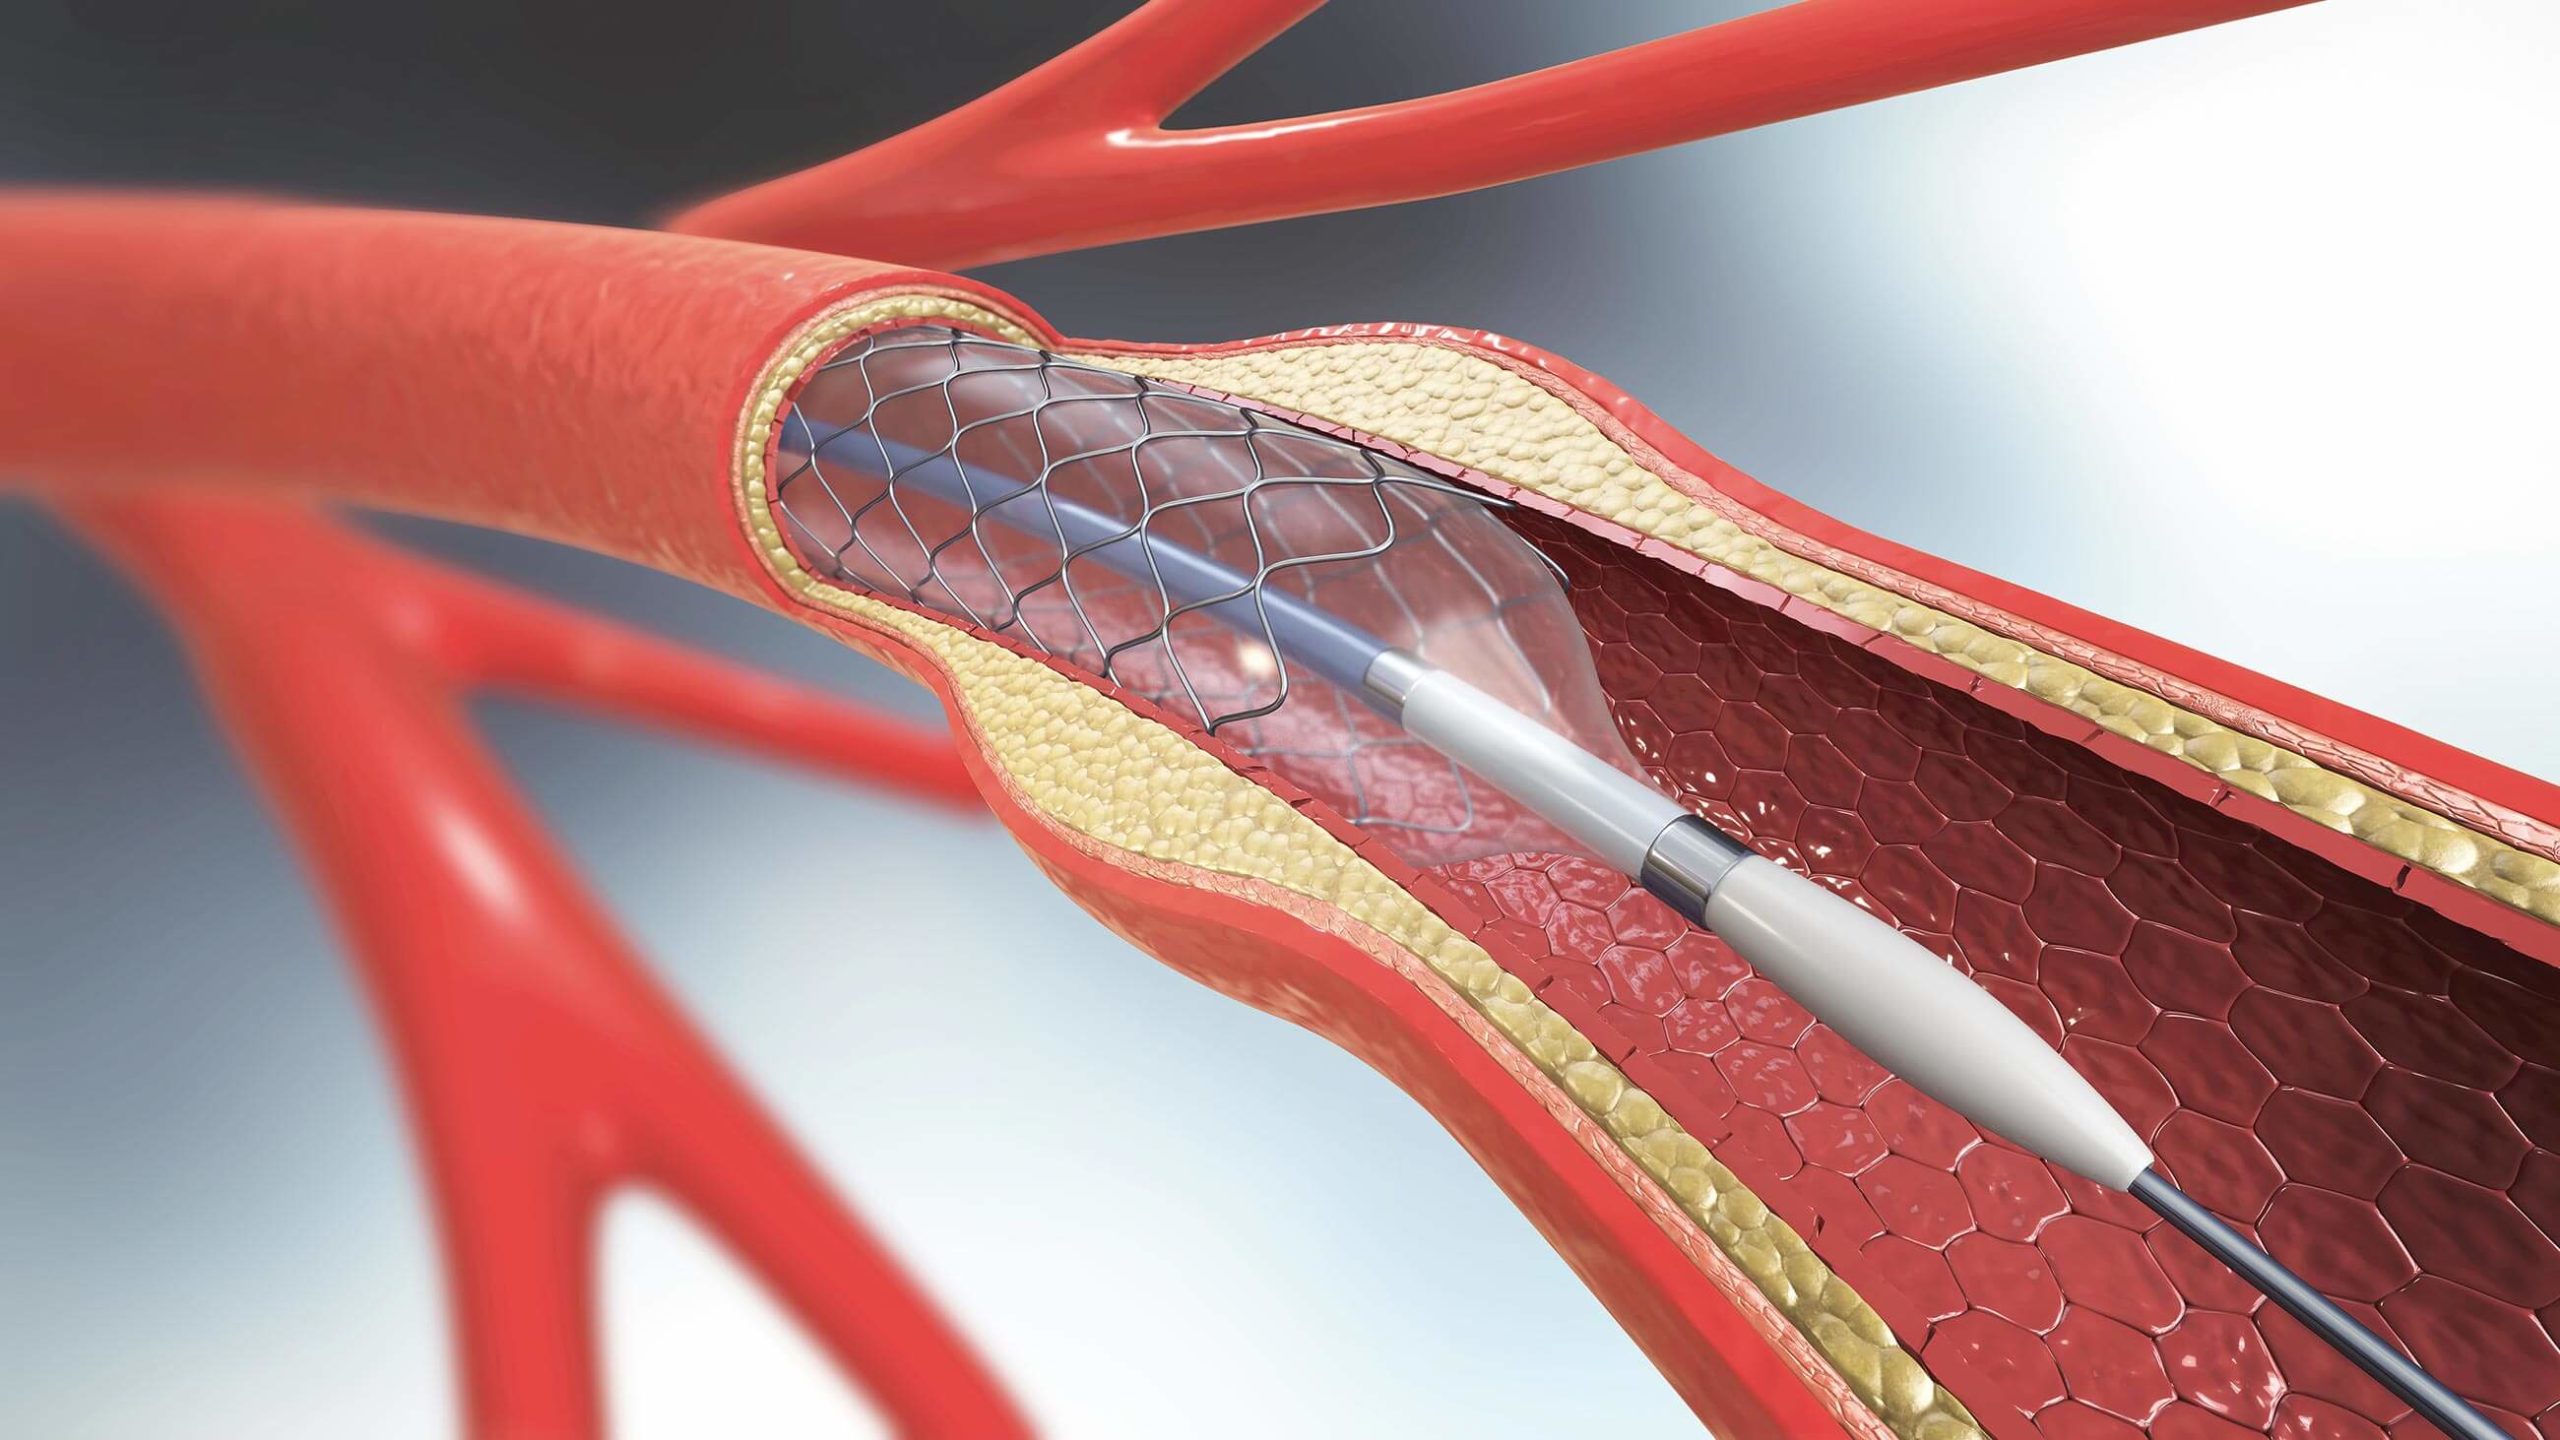 Stent Placement